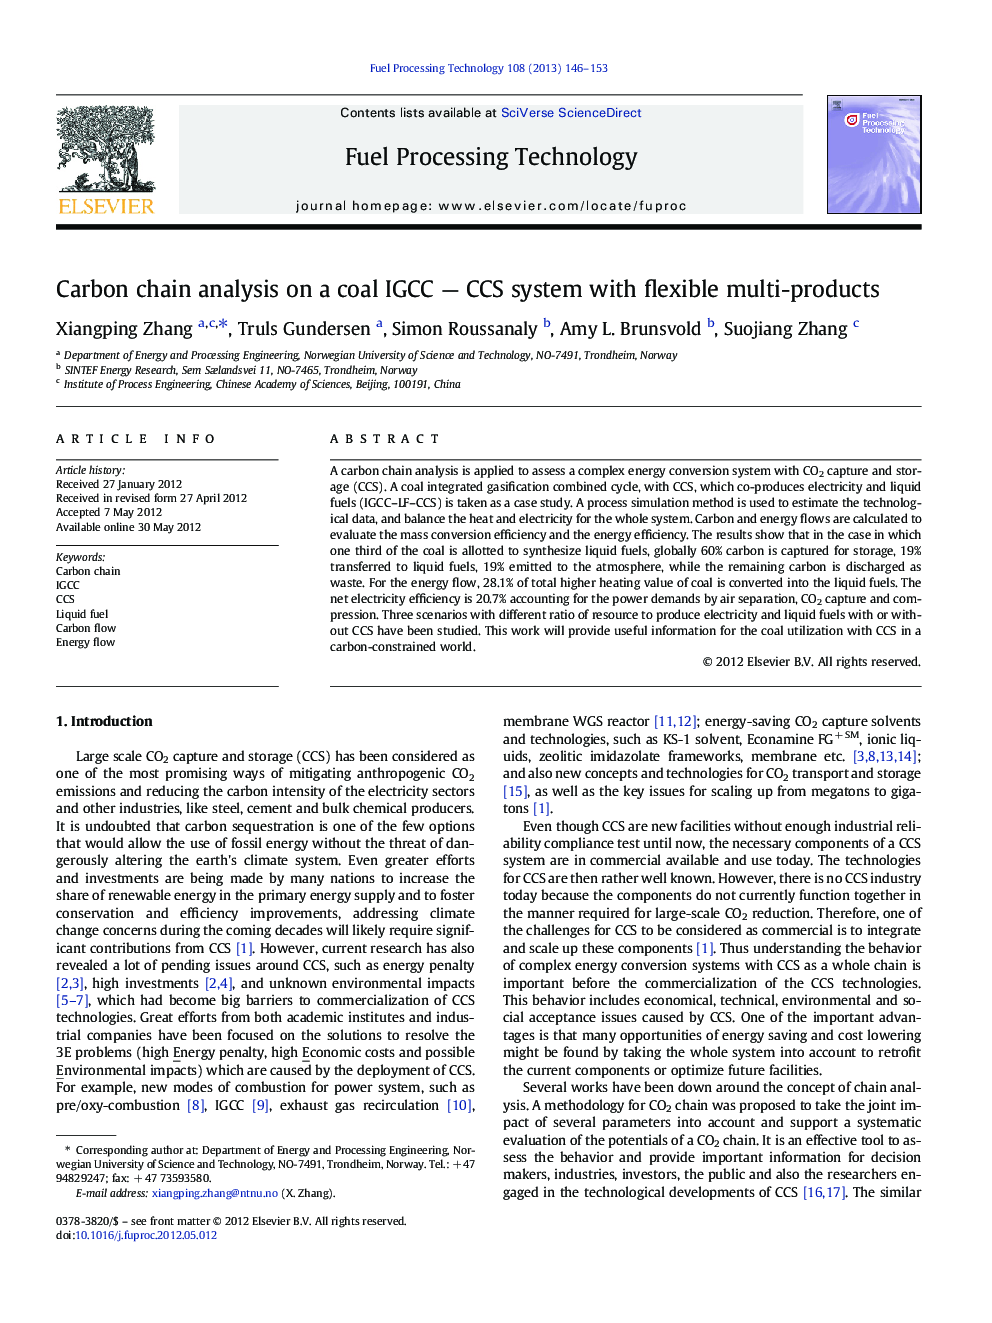 Carbon chain analysis on a coal IGCC — CCS system with flexible multi-products